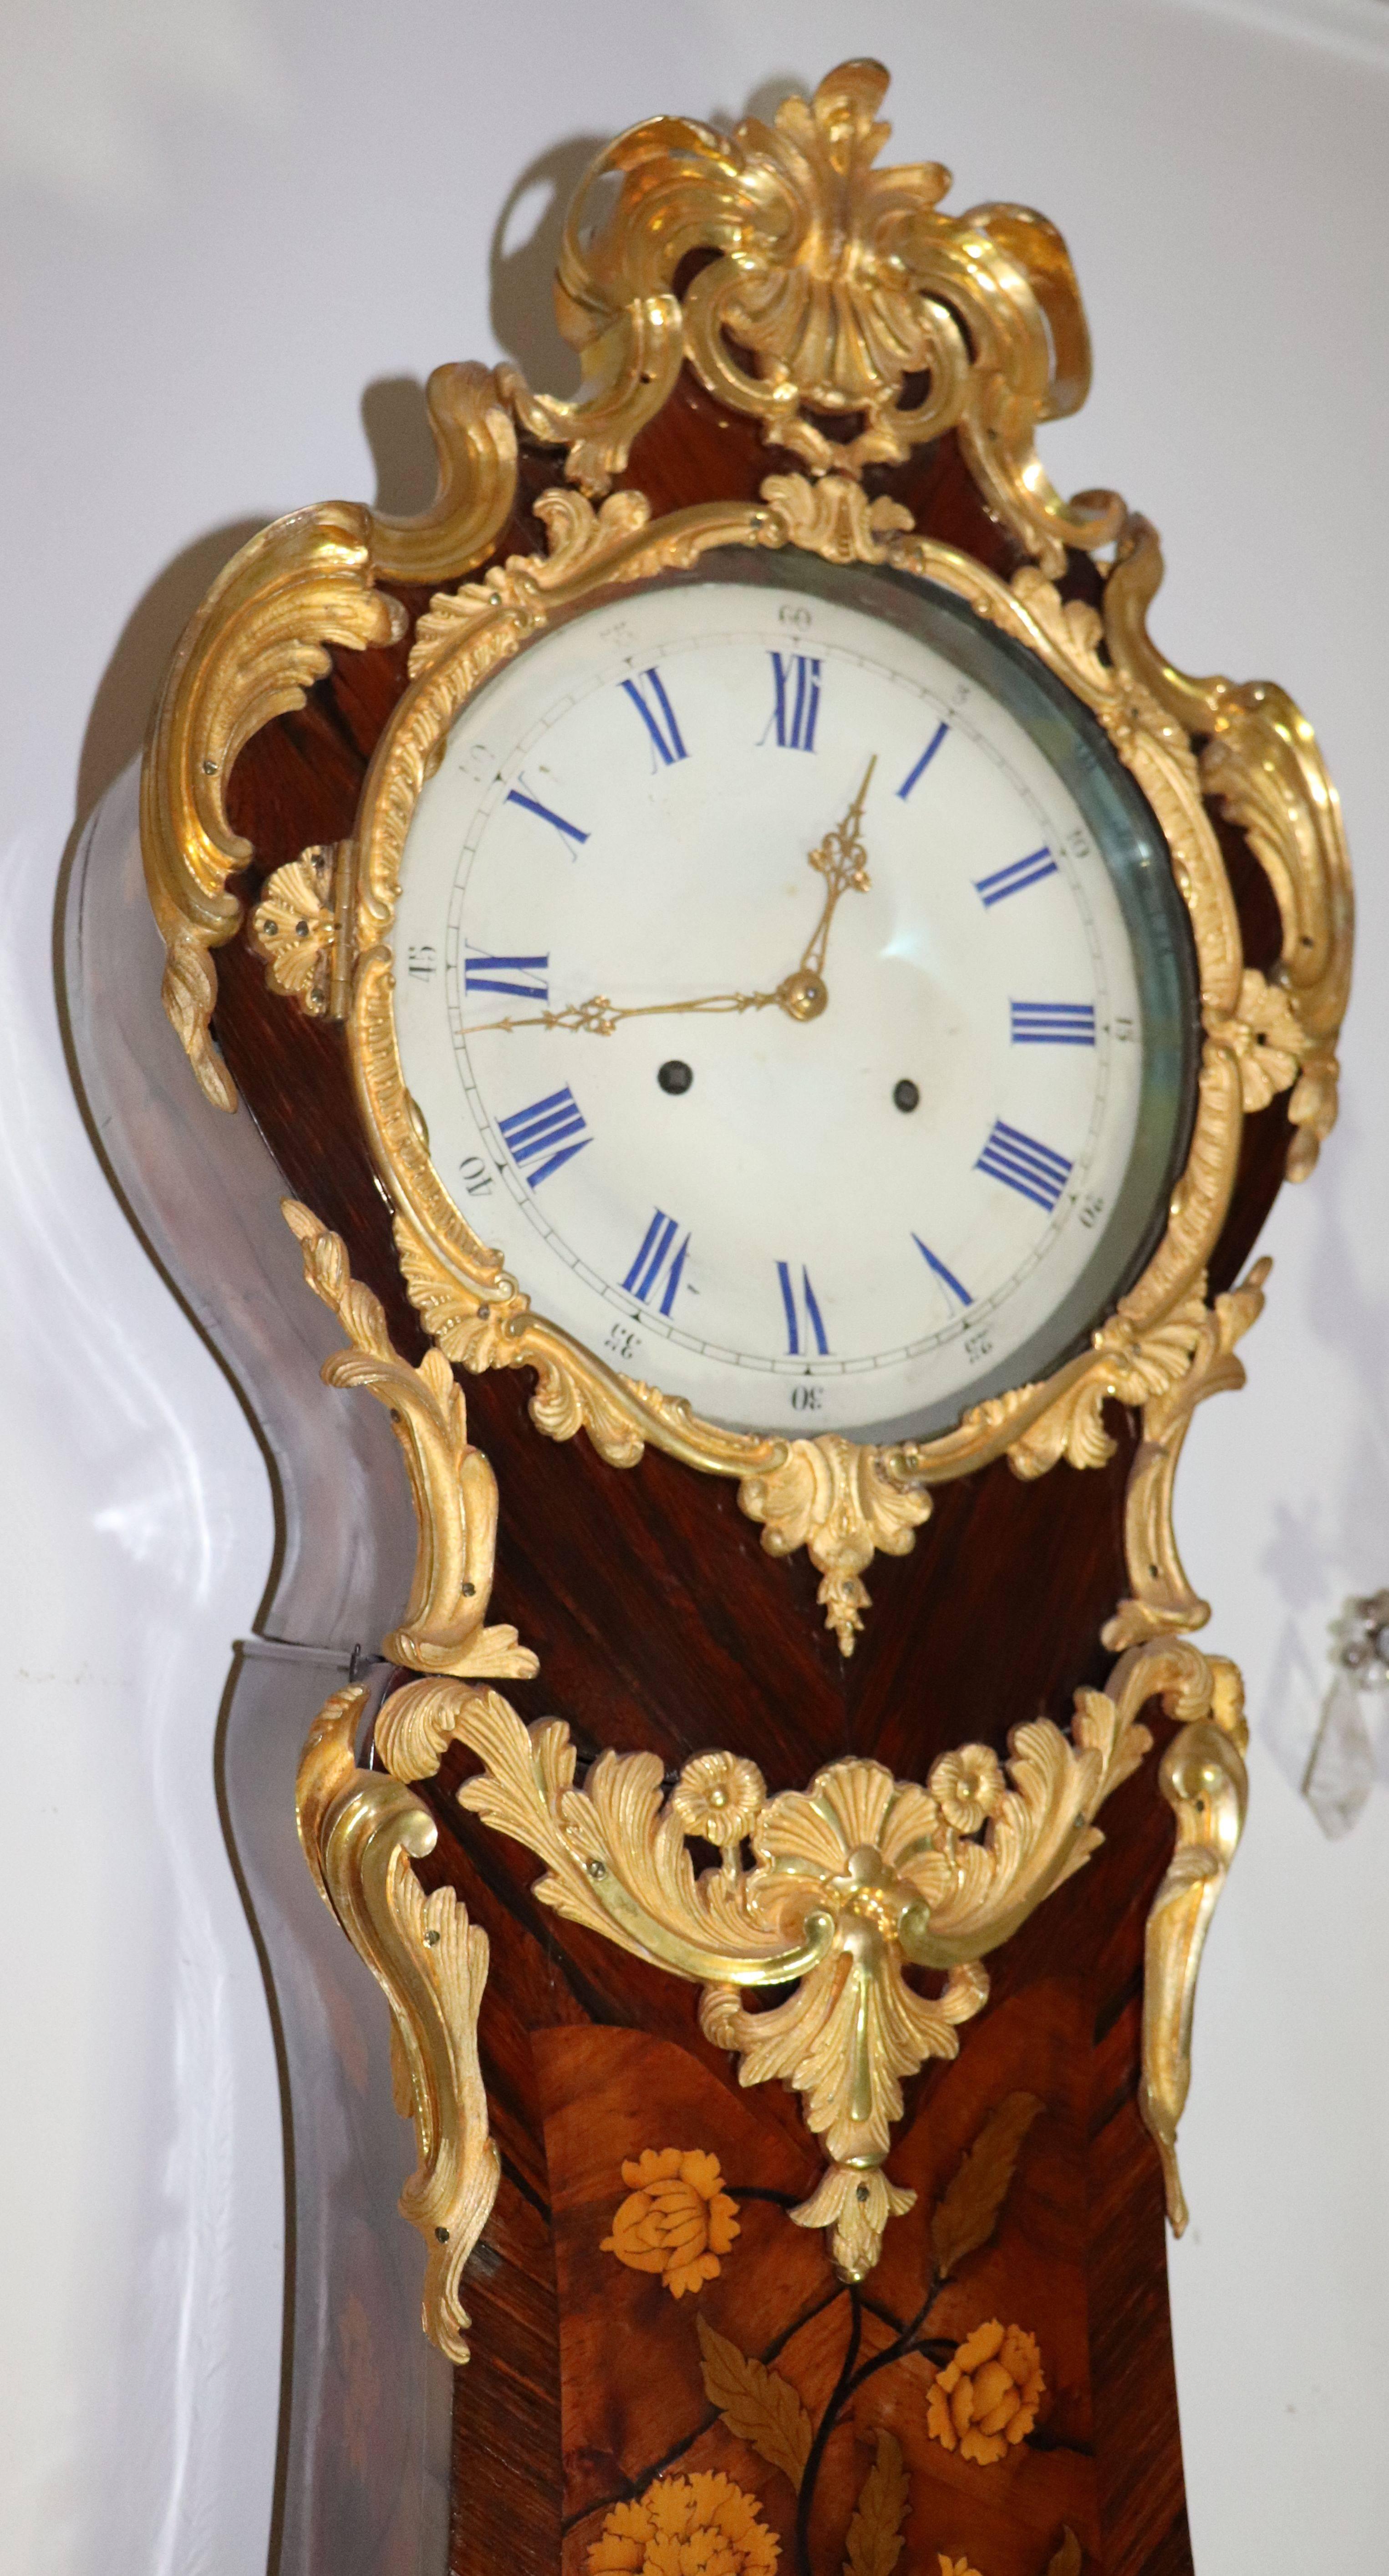 A longcase gilt bronze inlay clock middle of 19th century Linderot stockholm
movement dated 1851 signed Linderot stockholm.